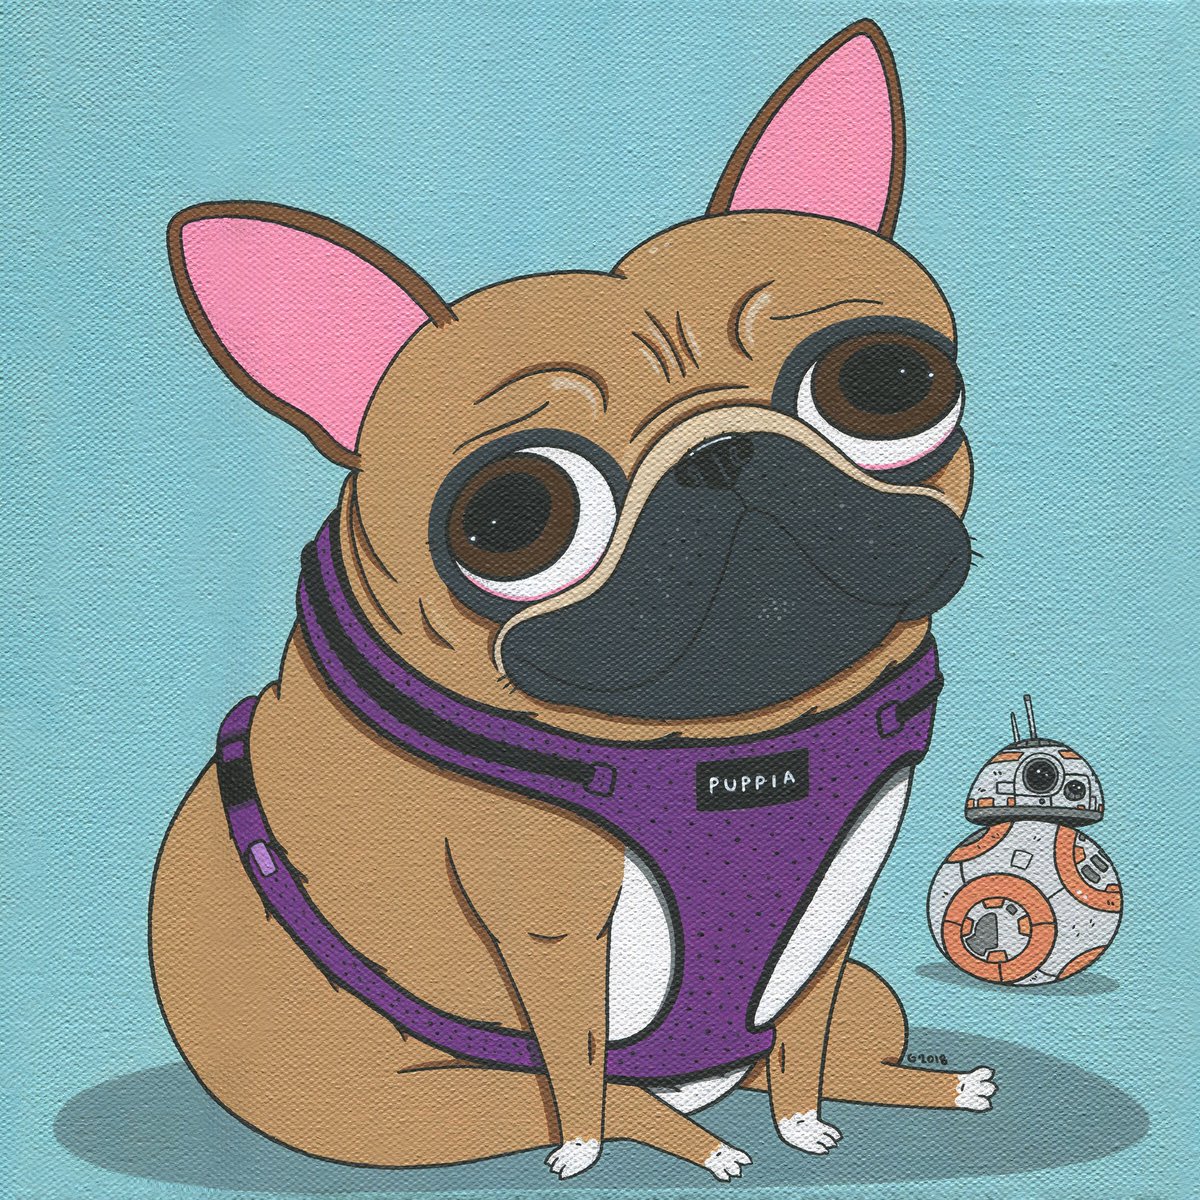 BiBi the Frenchie! She’s named after BB-8 from Star Wars. Thanks Michelle! #starwars #bb8 #paint #acylicpainting #frenchbulldog #cute #affordableart #kawaii #handpainted #pets #frenchbulldoglovers #dogsofinstagram #thegrossuncle